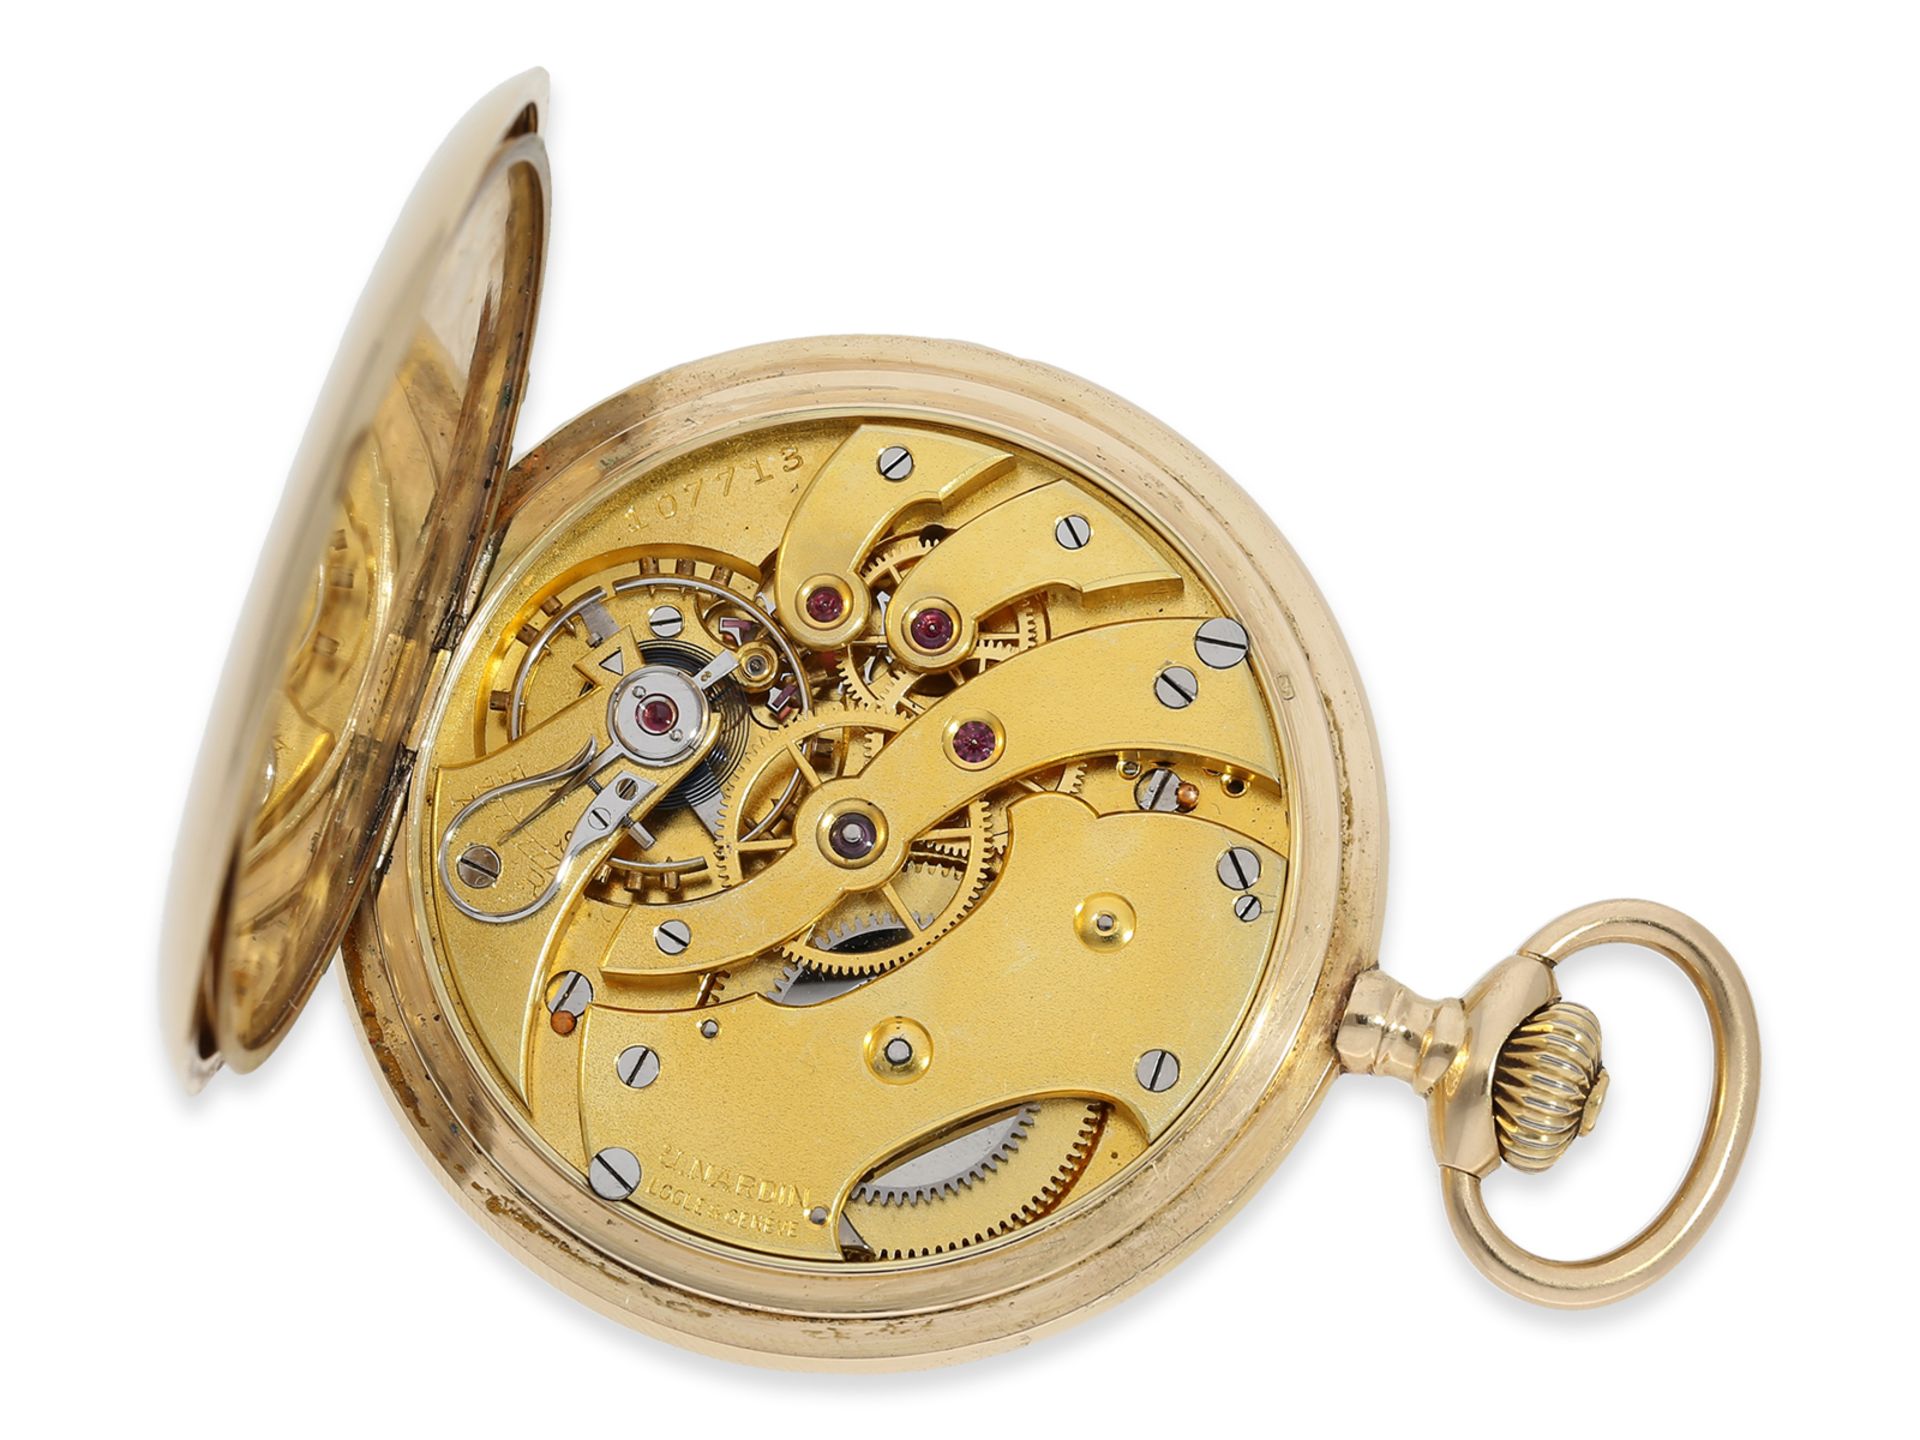 Pocket Watch: very fine precision pocket watch by Ulysse Nardin with original papers from 1913 - Image 2 of 8